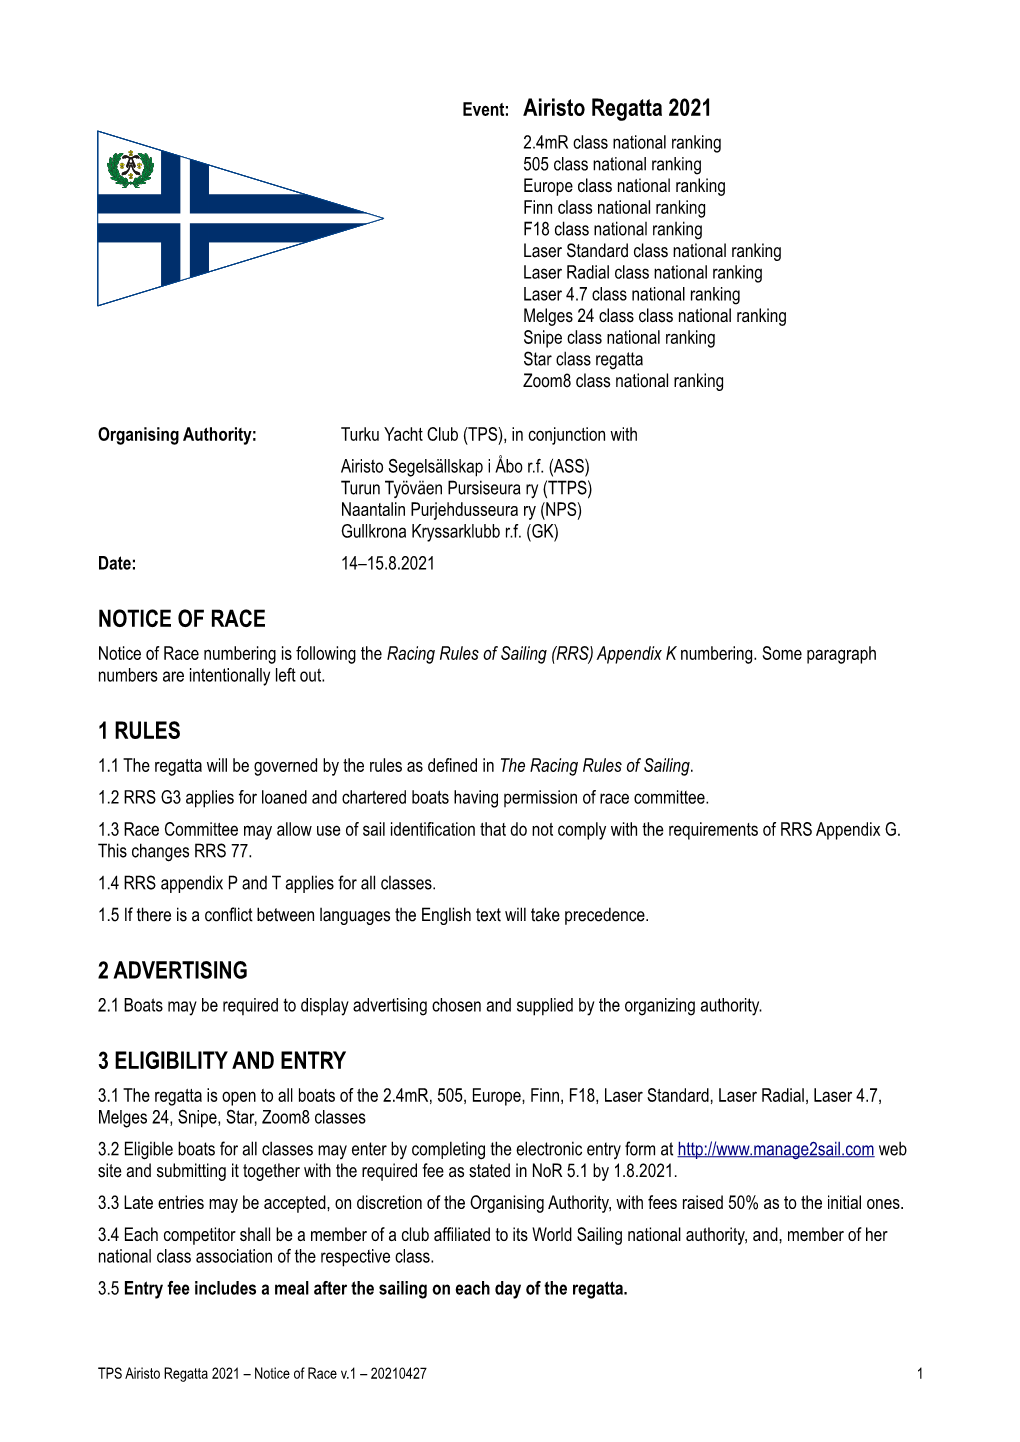 Airisto Regatta 2021 NOTICE of RACE 1 RULES 2 ADVERTISING 3 ELIGIBILITY and ENTRY